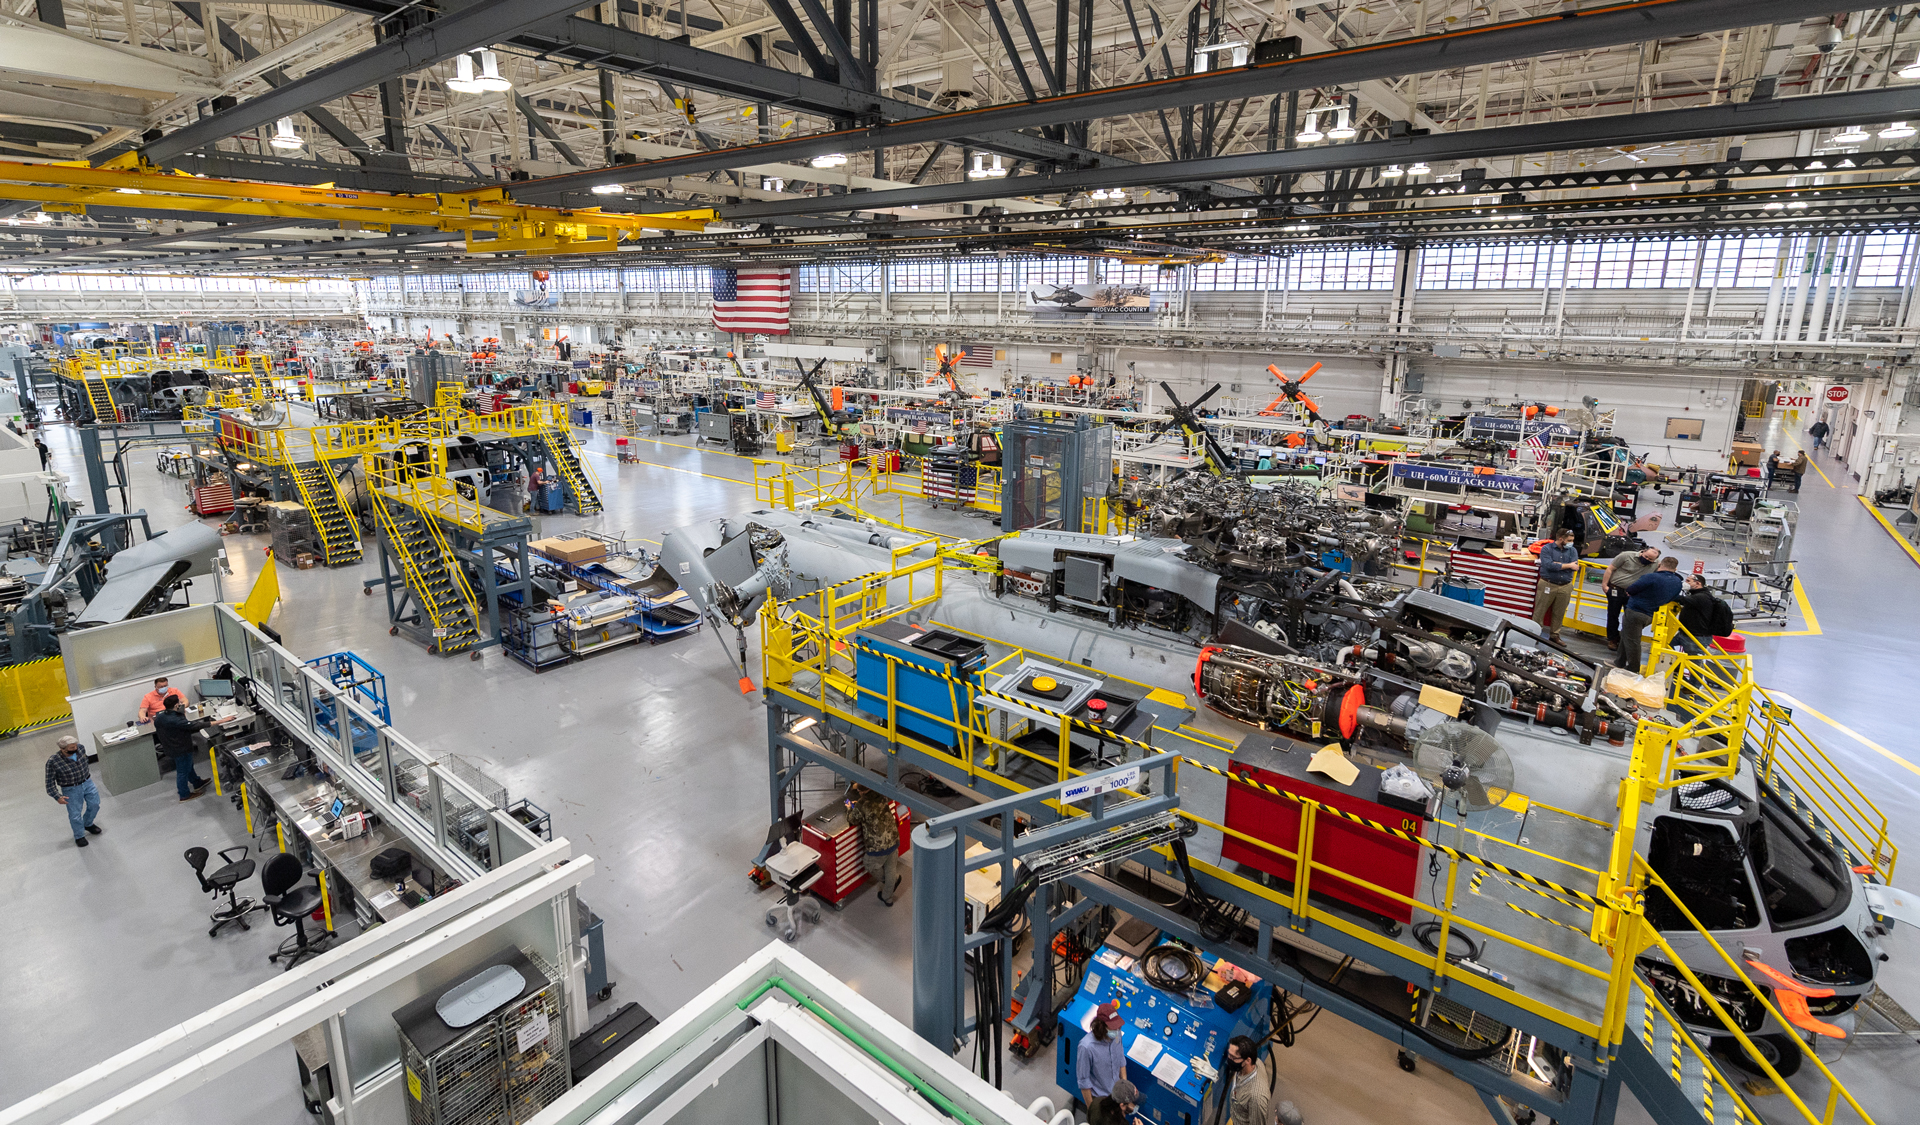 Stratford, Conn.: Sikorsky employees building CH-53K ™aircraft utilizing 3-D work instructions, new titanium machining centers with multi-floor ergonomic platforms.